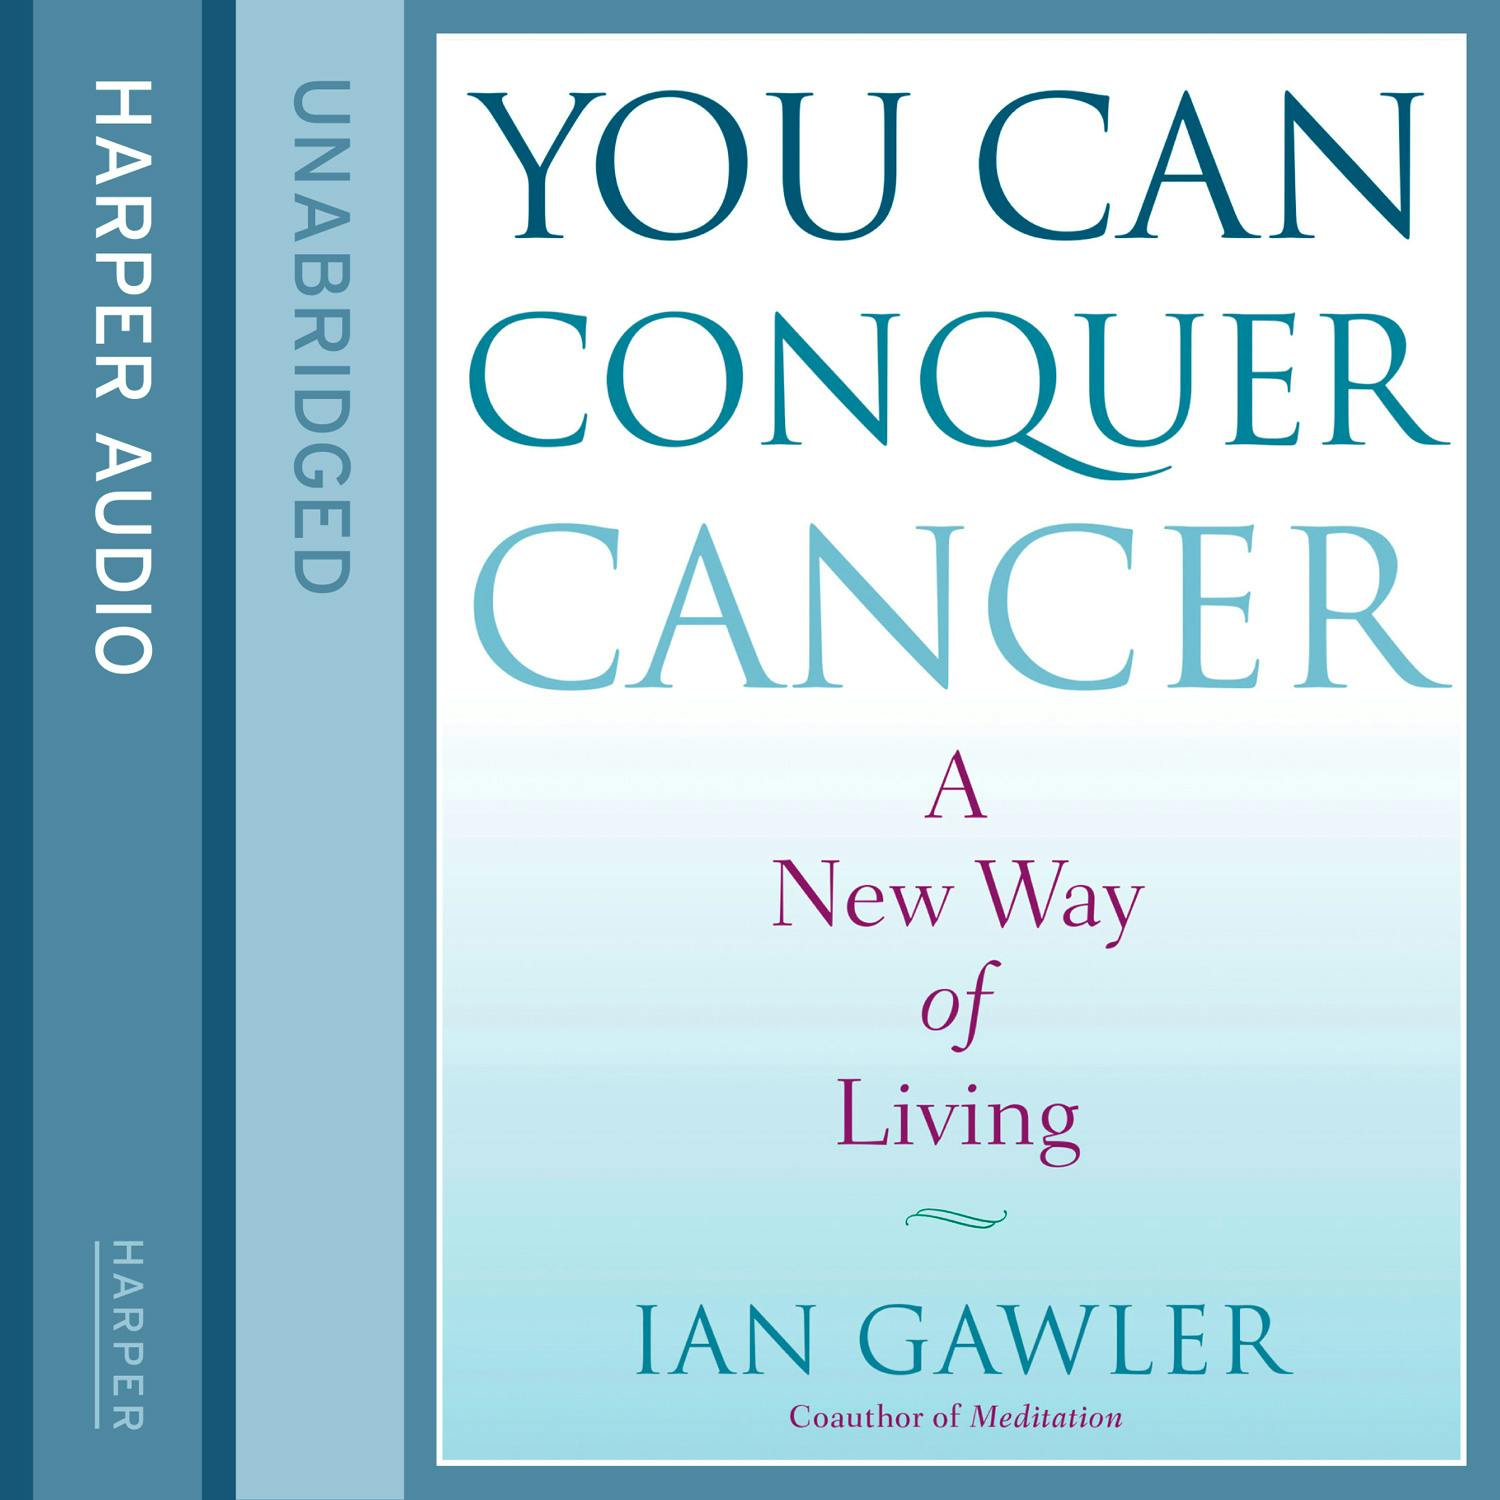 You Can Conquer Cancer: The ground-breaking self-help manual including nutrition, meditation and lifestyle management techniques - Ian Gawler